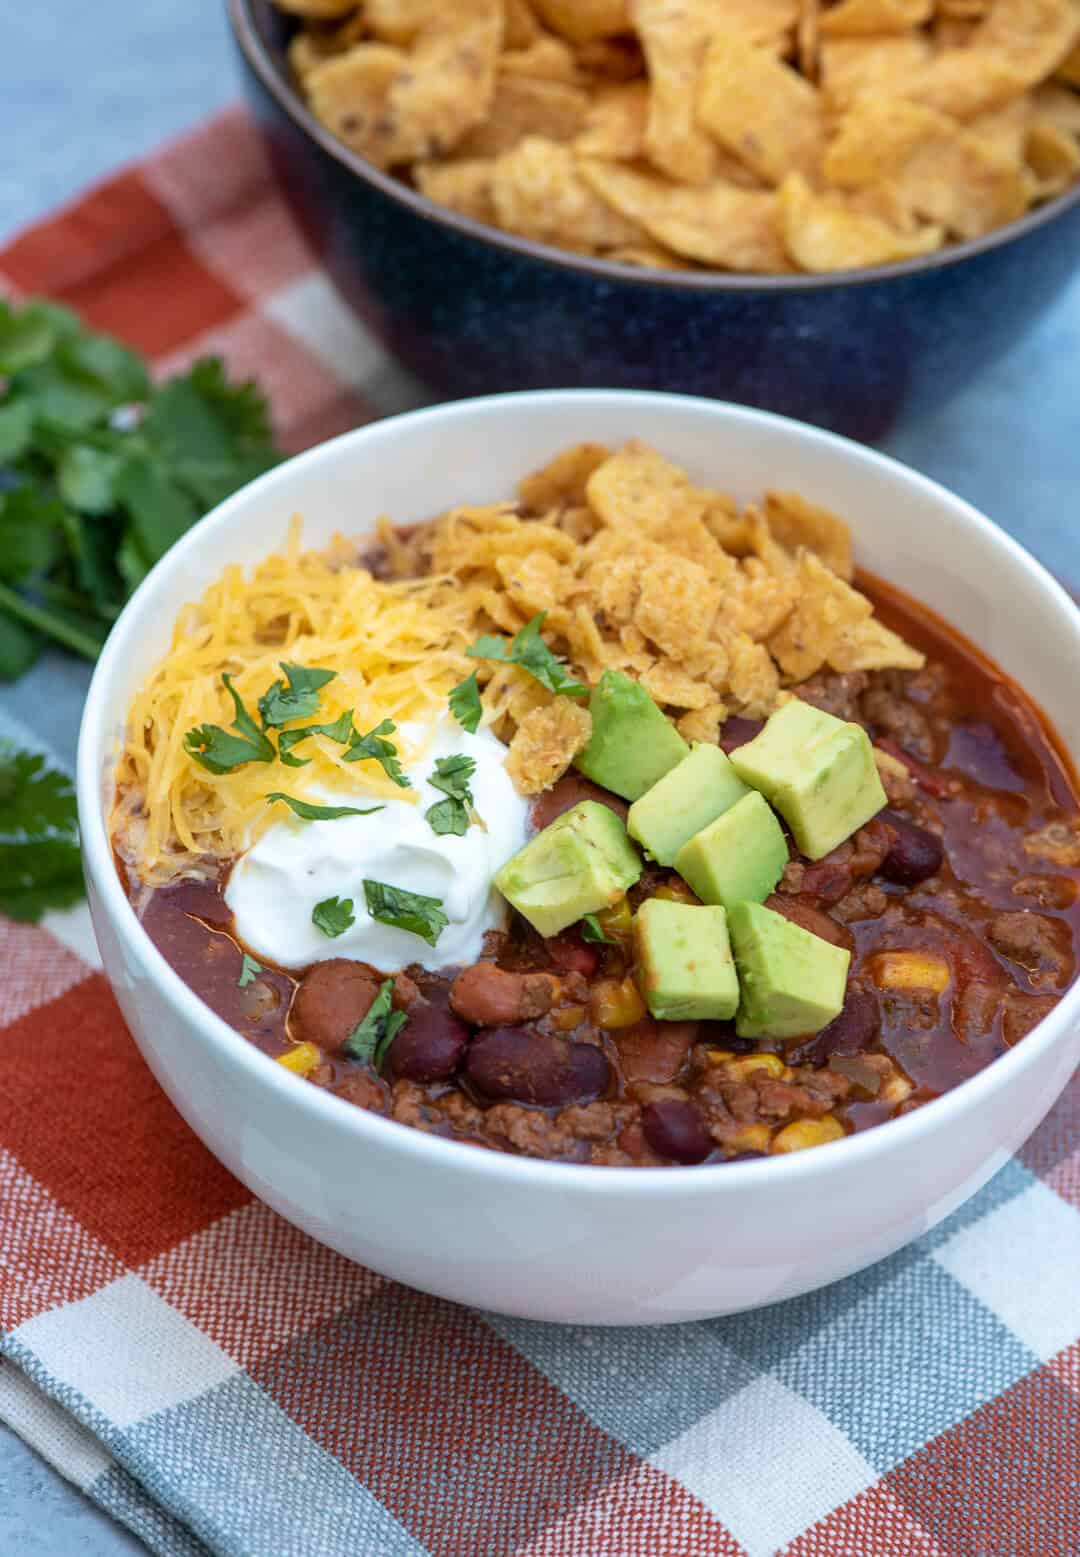 A serving of Beef and Bean Taco Chili in a white bowl garnished with corn chips, sour cream, avocado and cheese on a checked cloth.